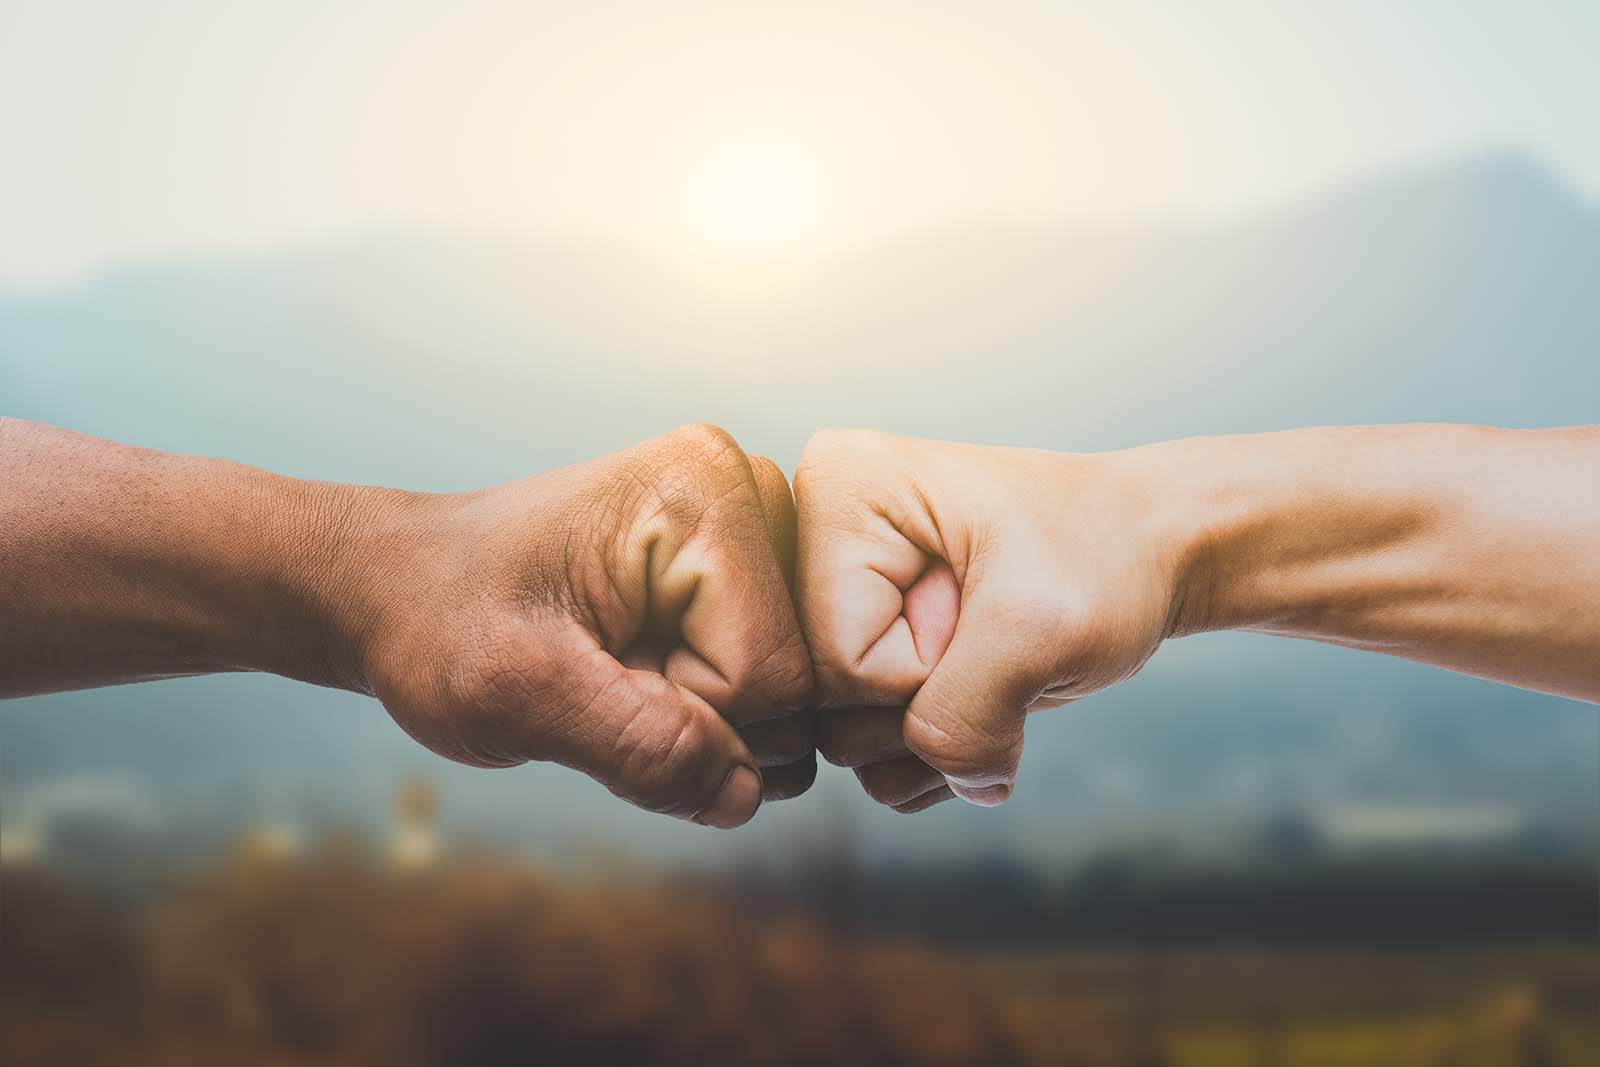 Man giving fist bump in sun rising nature background.